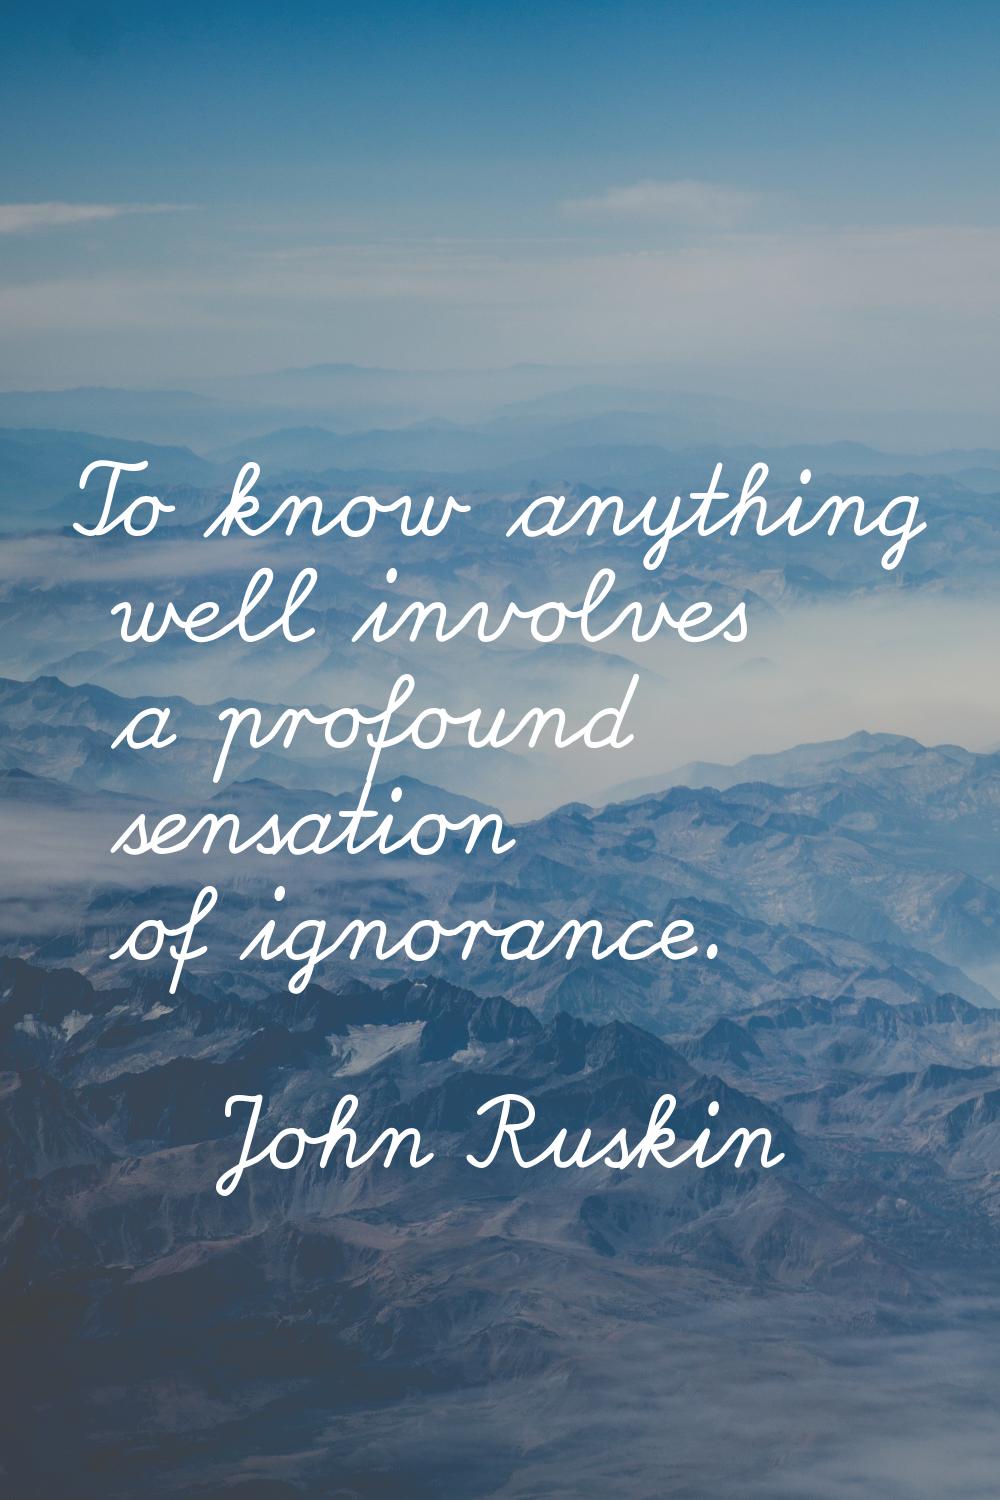 To know anything well involves a profound sensation of ignorance.